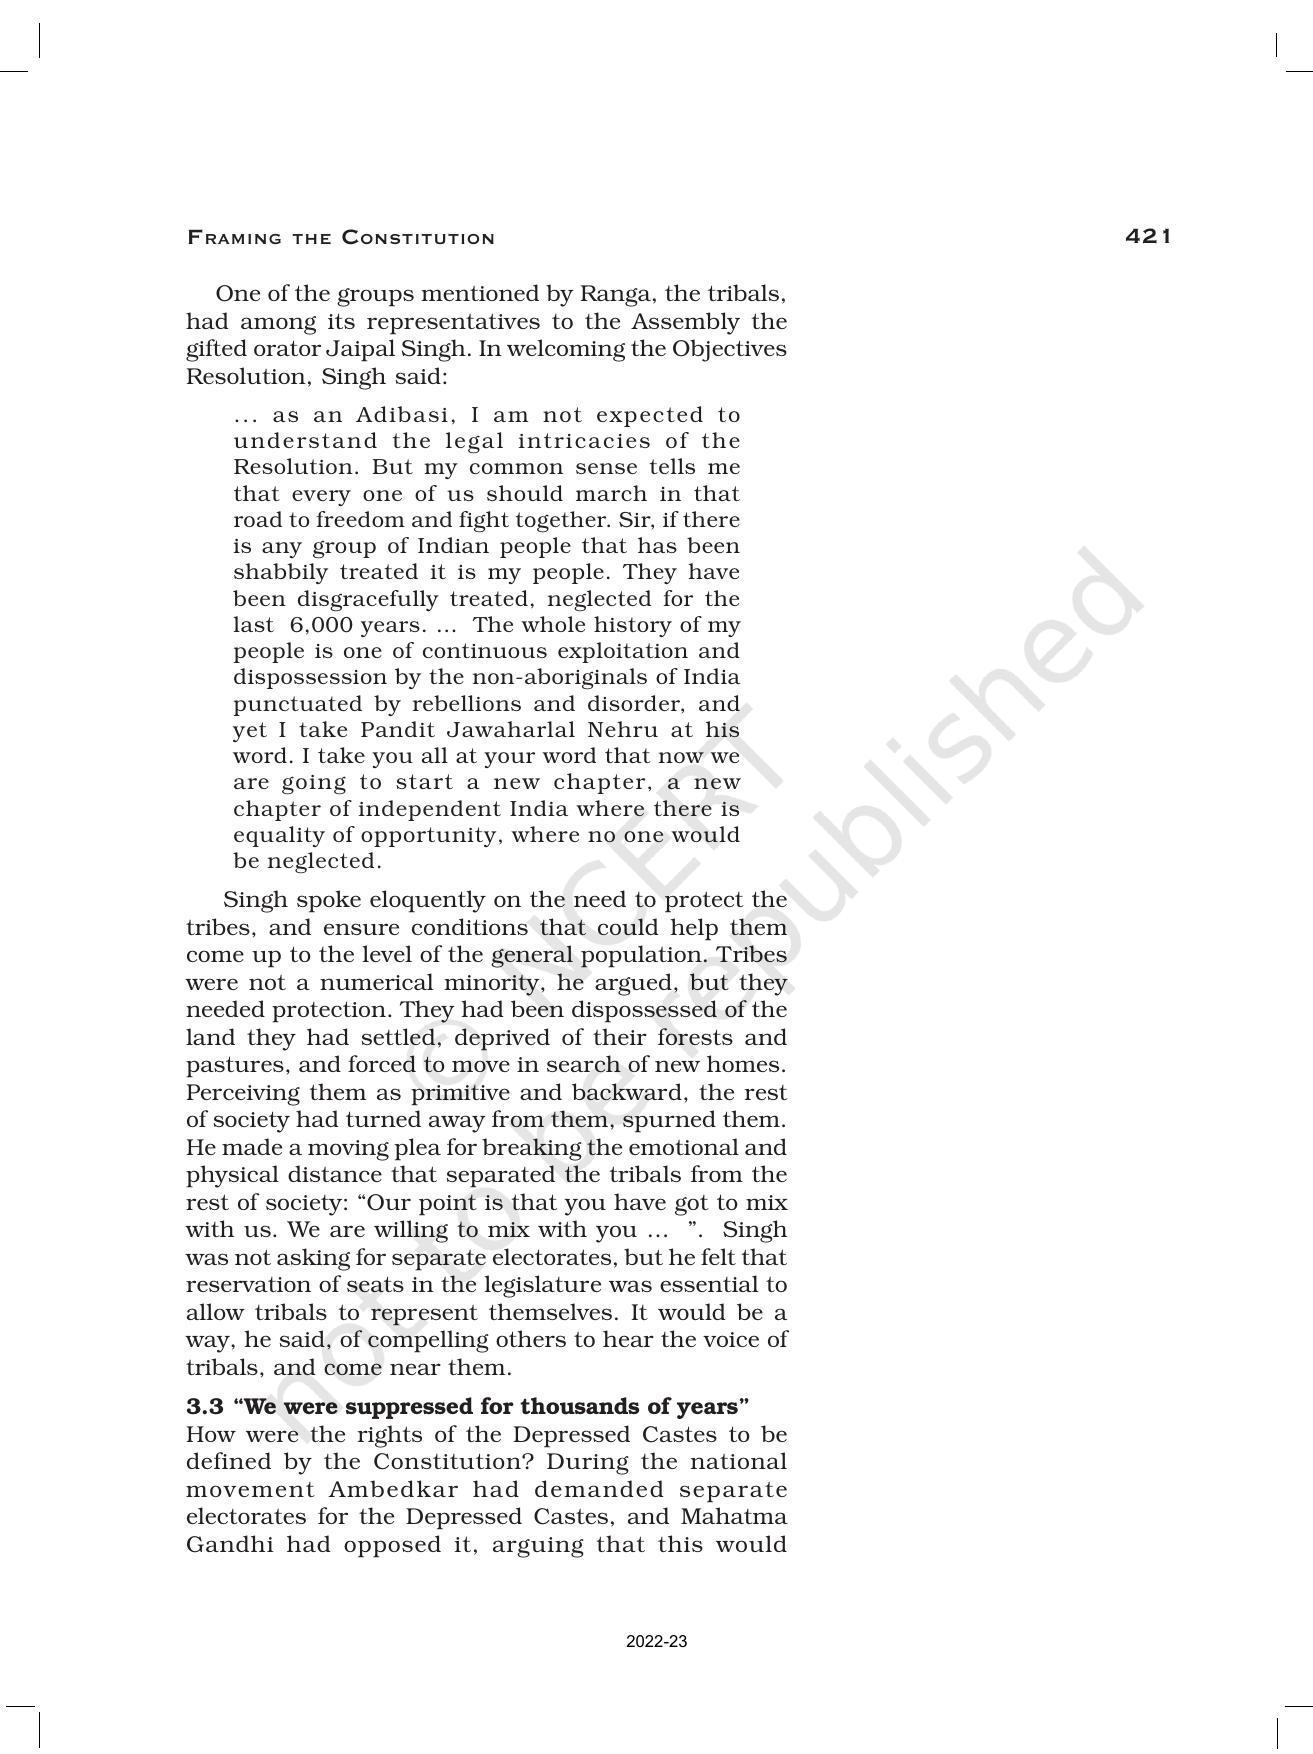 NCERT Book for Class 12 History (Part-III) Chapter 15 Framing and the Constitution - Page 17